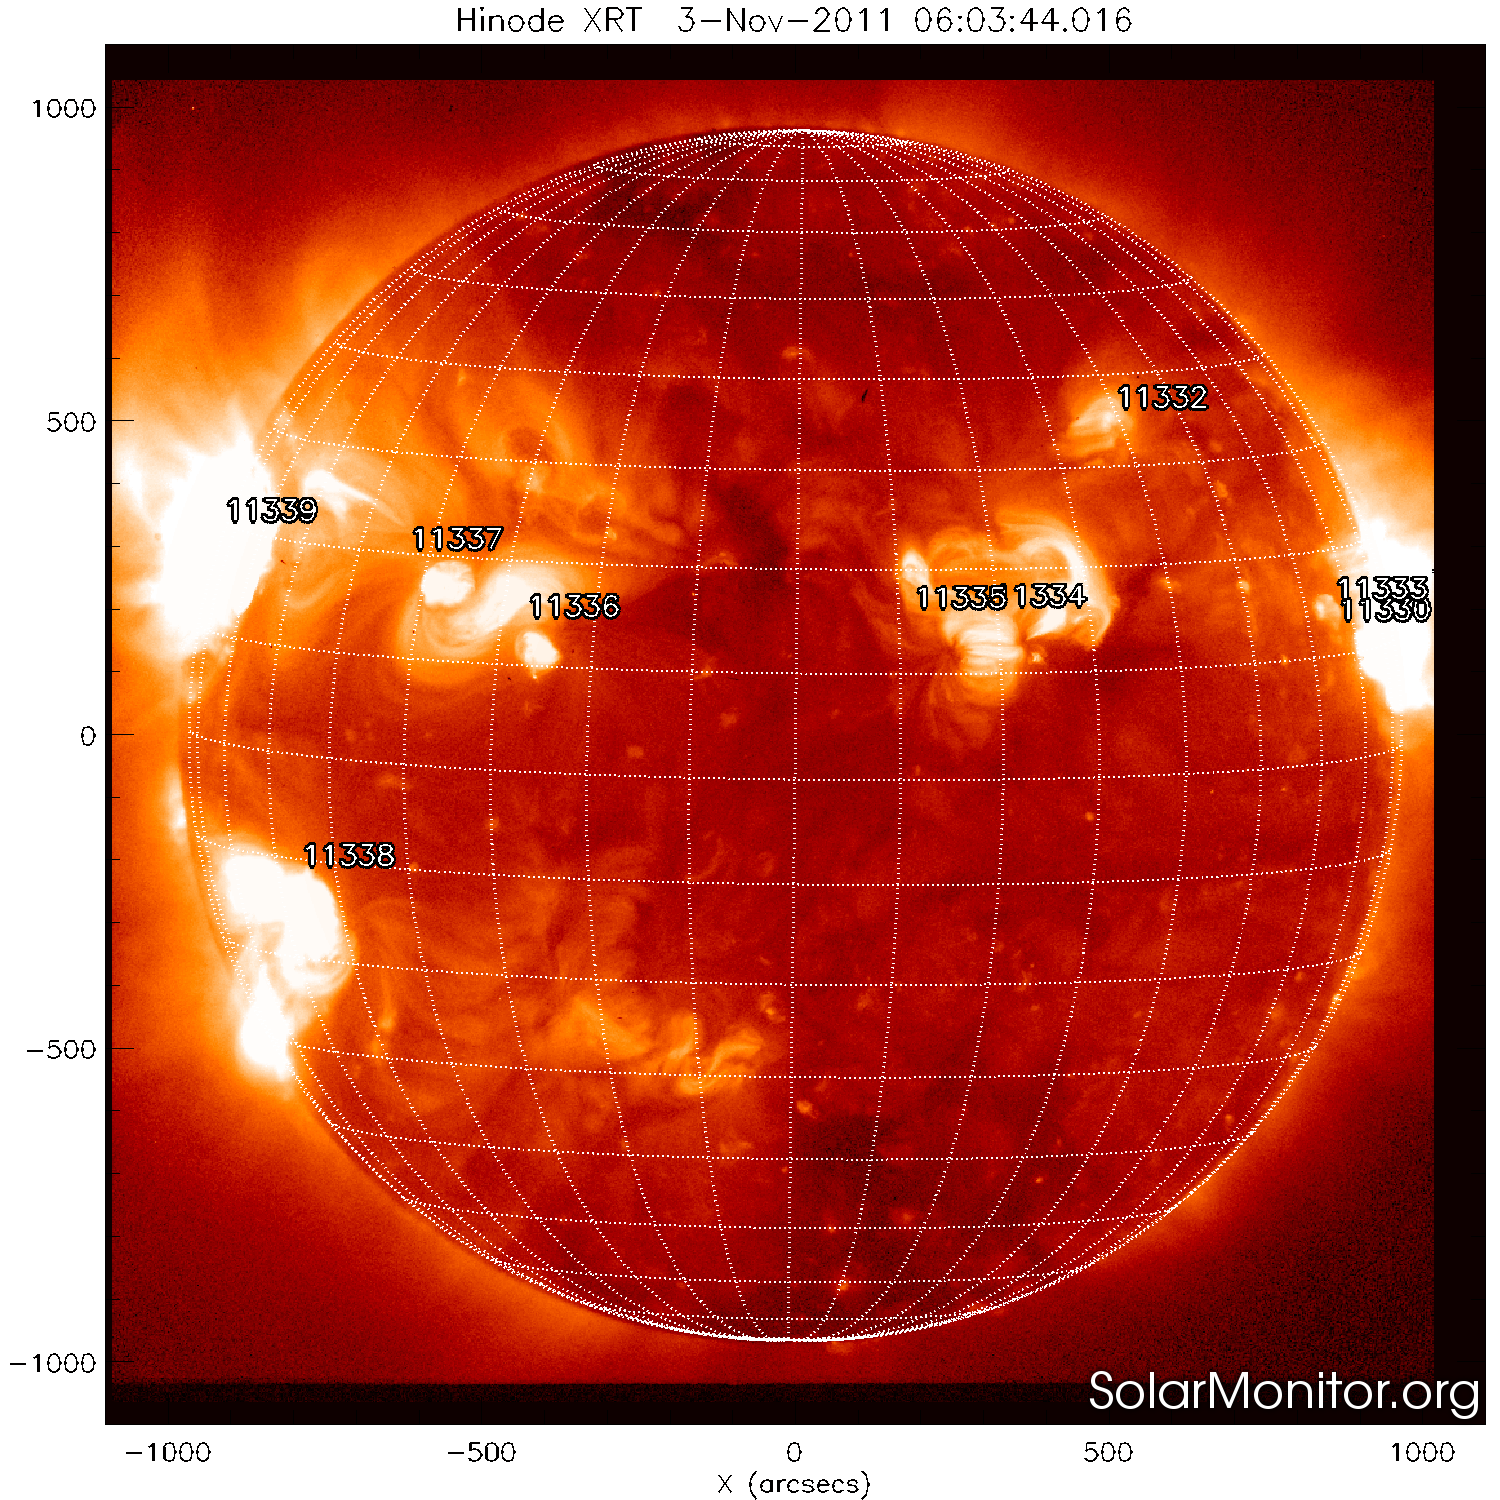 big-sunspot-starting-to-release-x-class-solar-flares